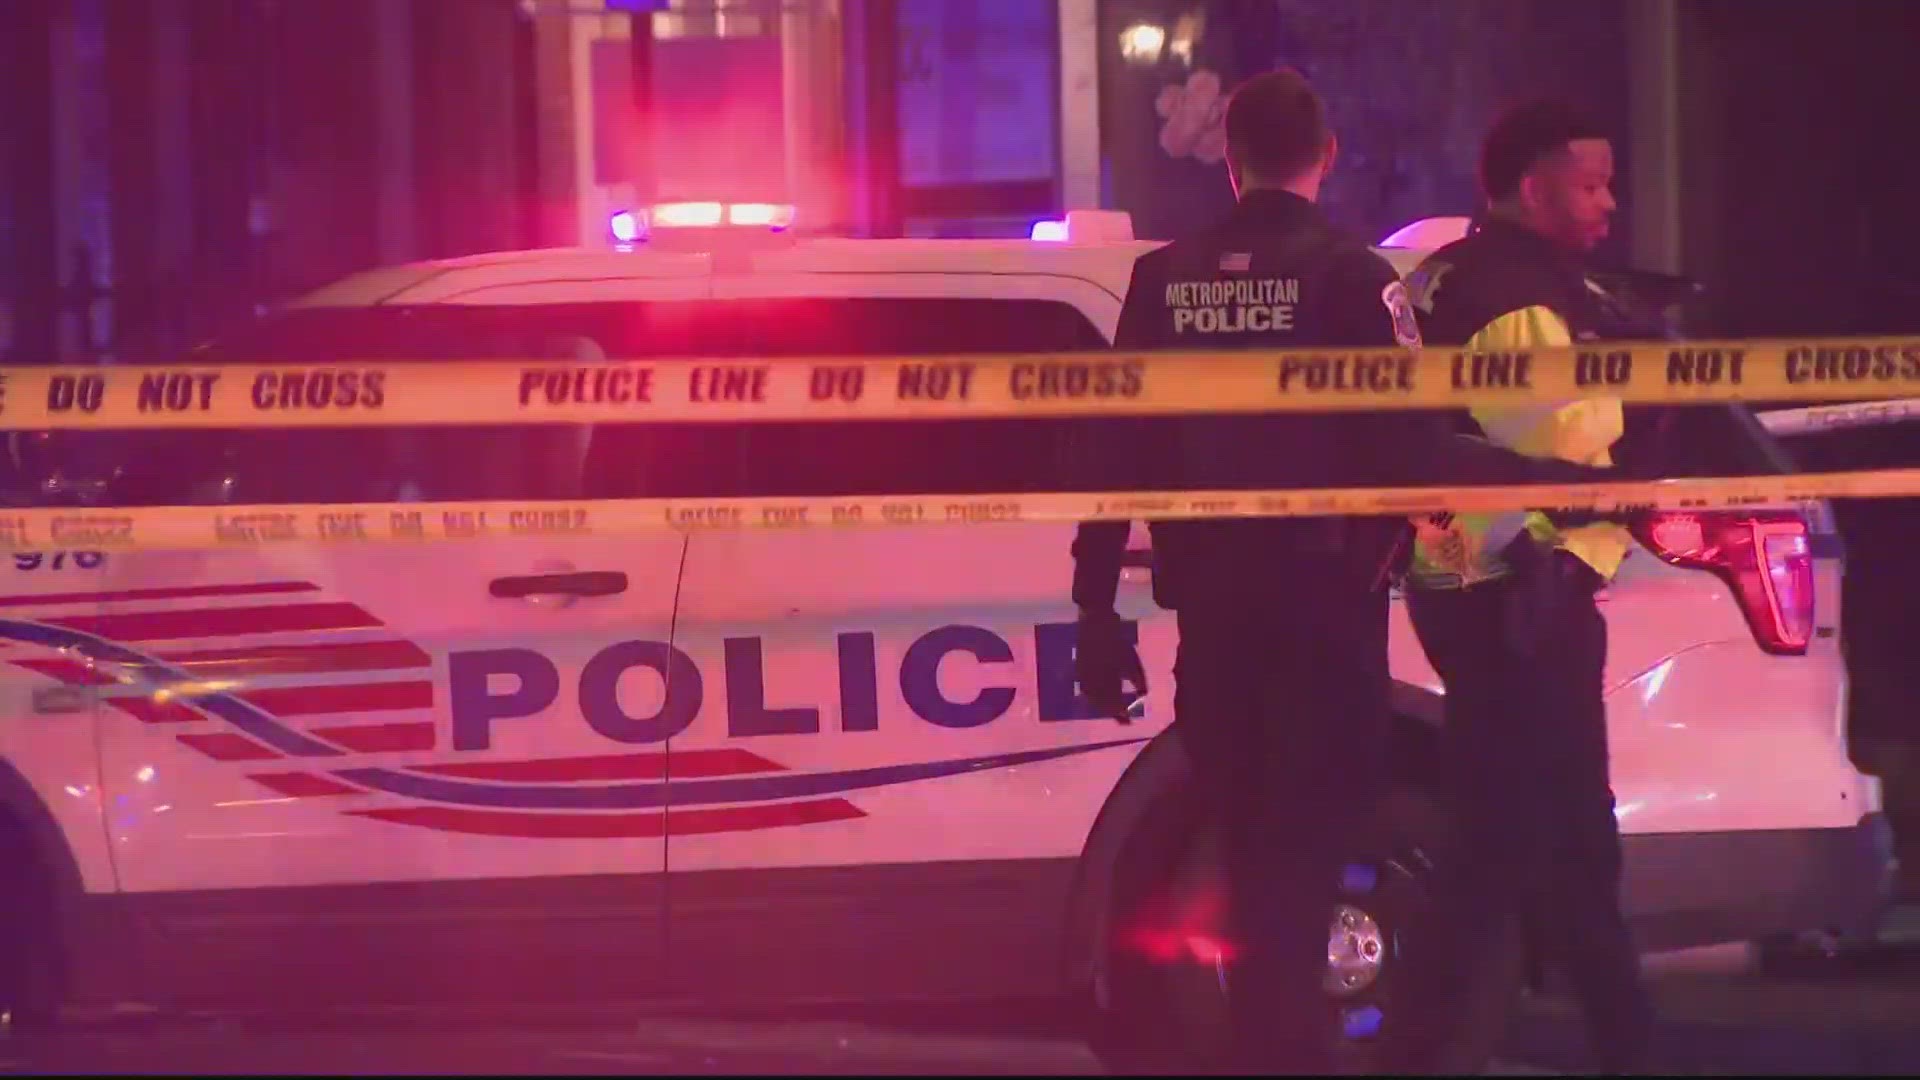 Two men were killed in a shooting in Southeast, D.C. Sunday evening, and police are still searching for the shooters.